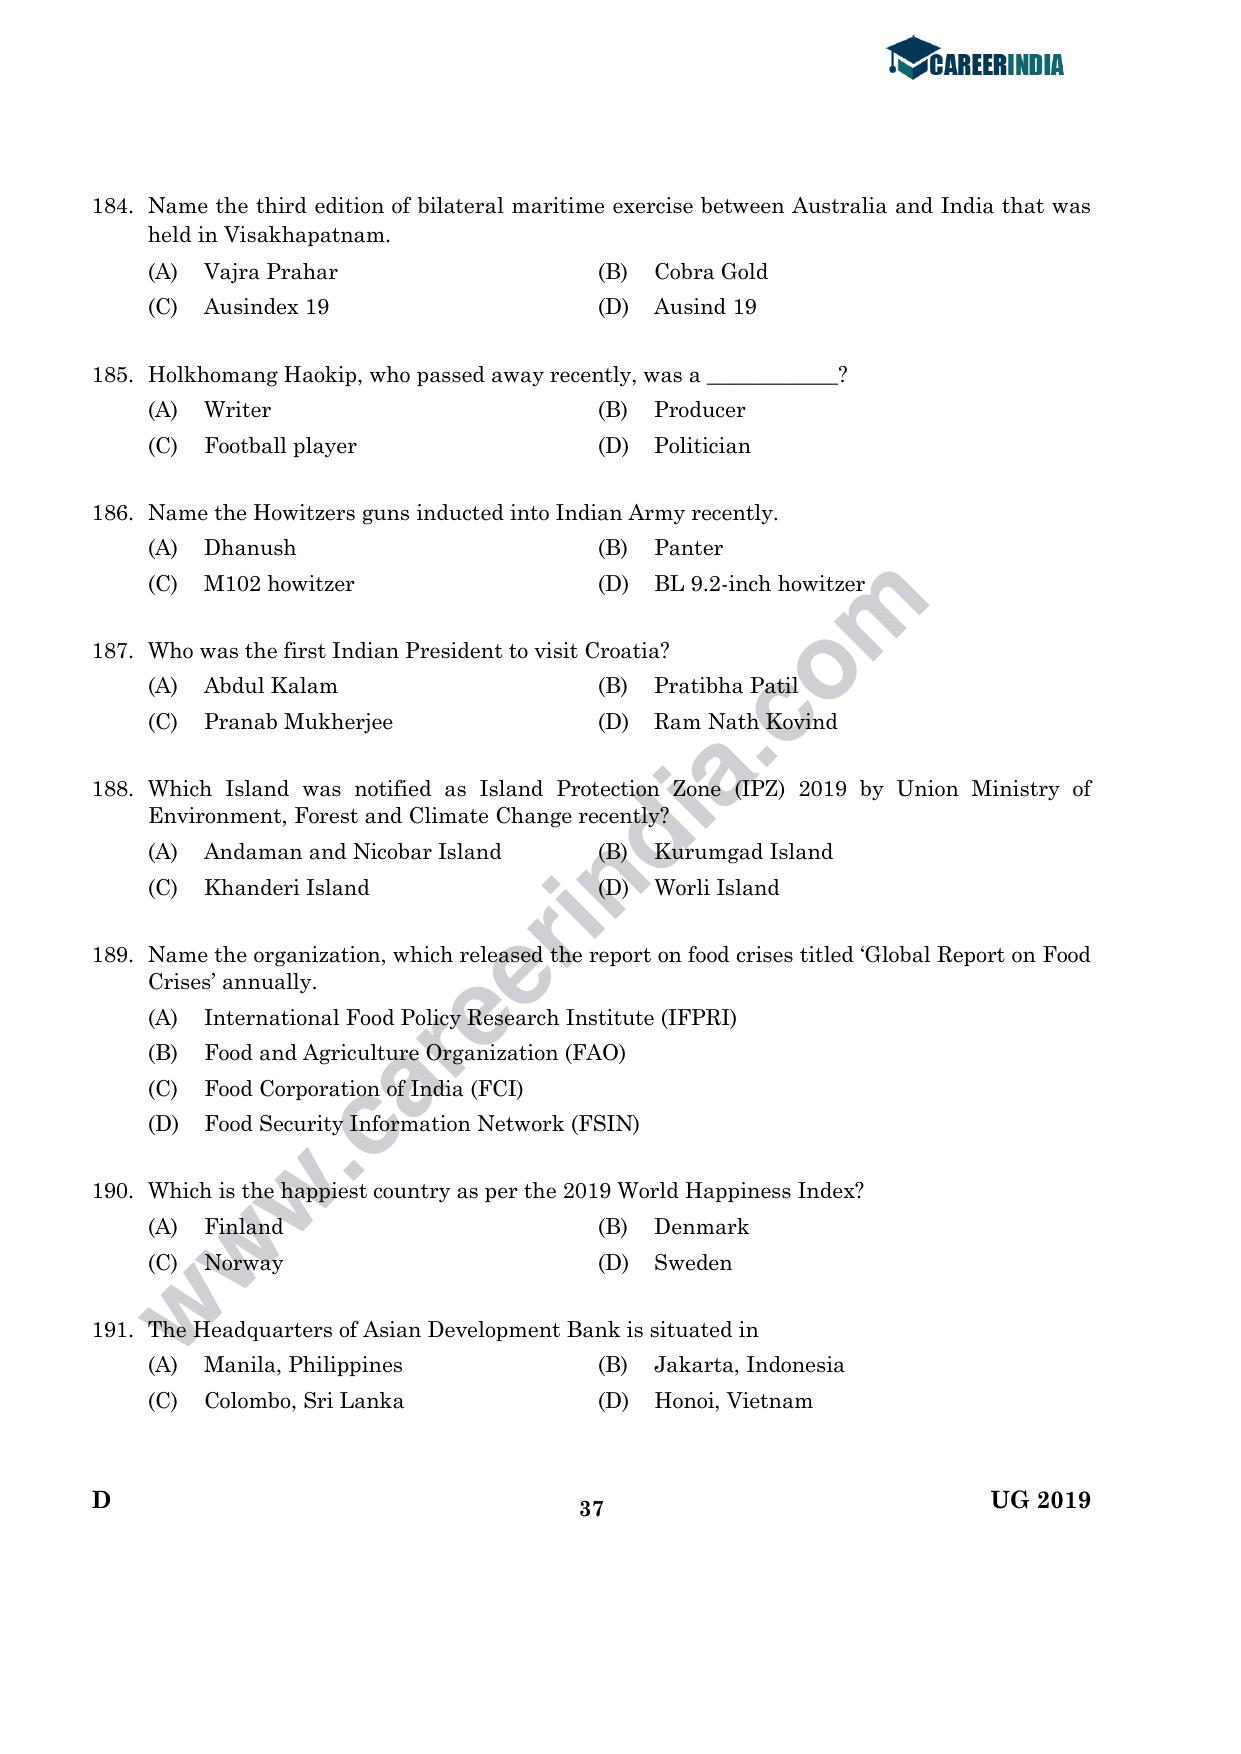 CLAT 2019 UG Logical-Reasoning Question Paper - Page 36